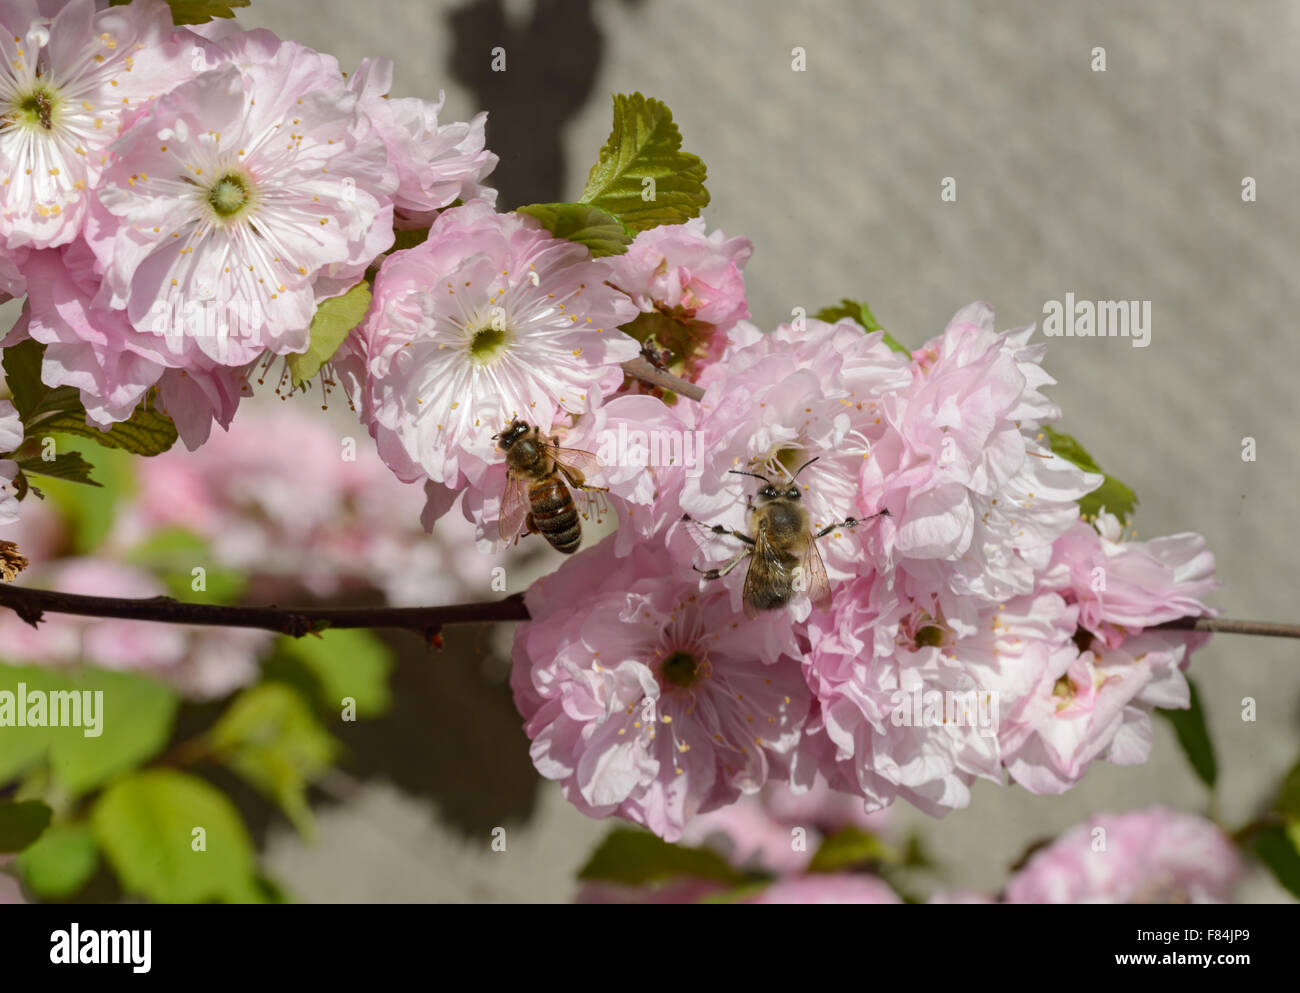 The bees are drinking nectar from the pink Prunus triloba flowers. Stock Photo